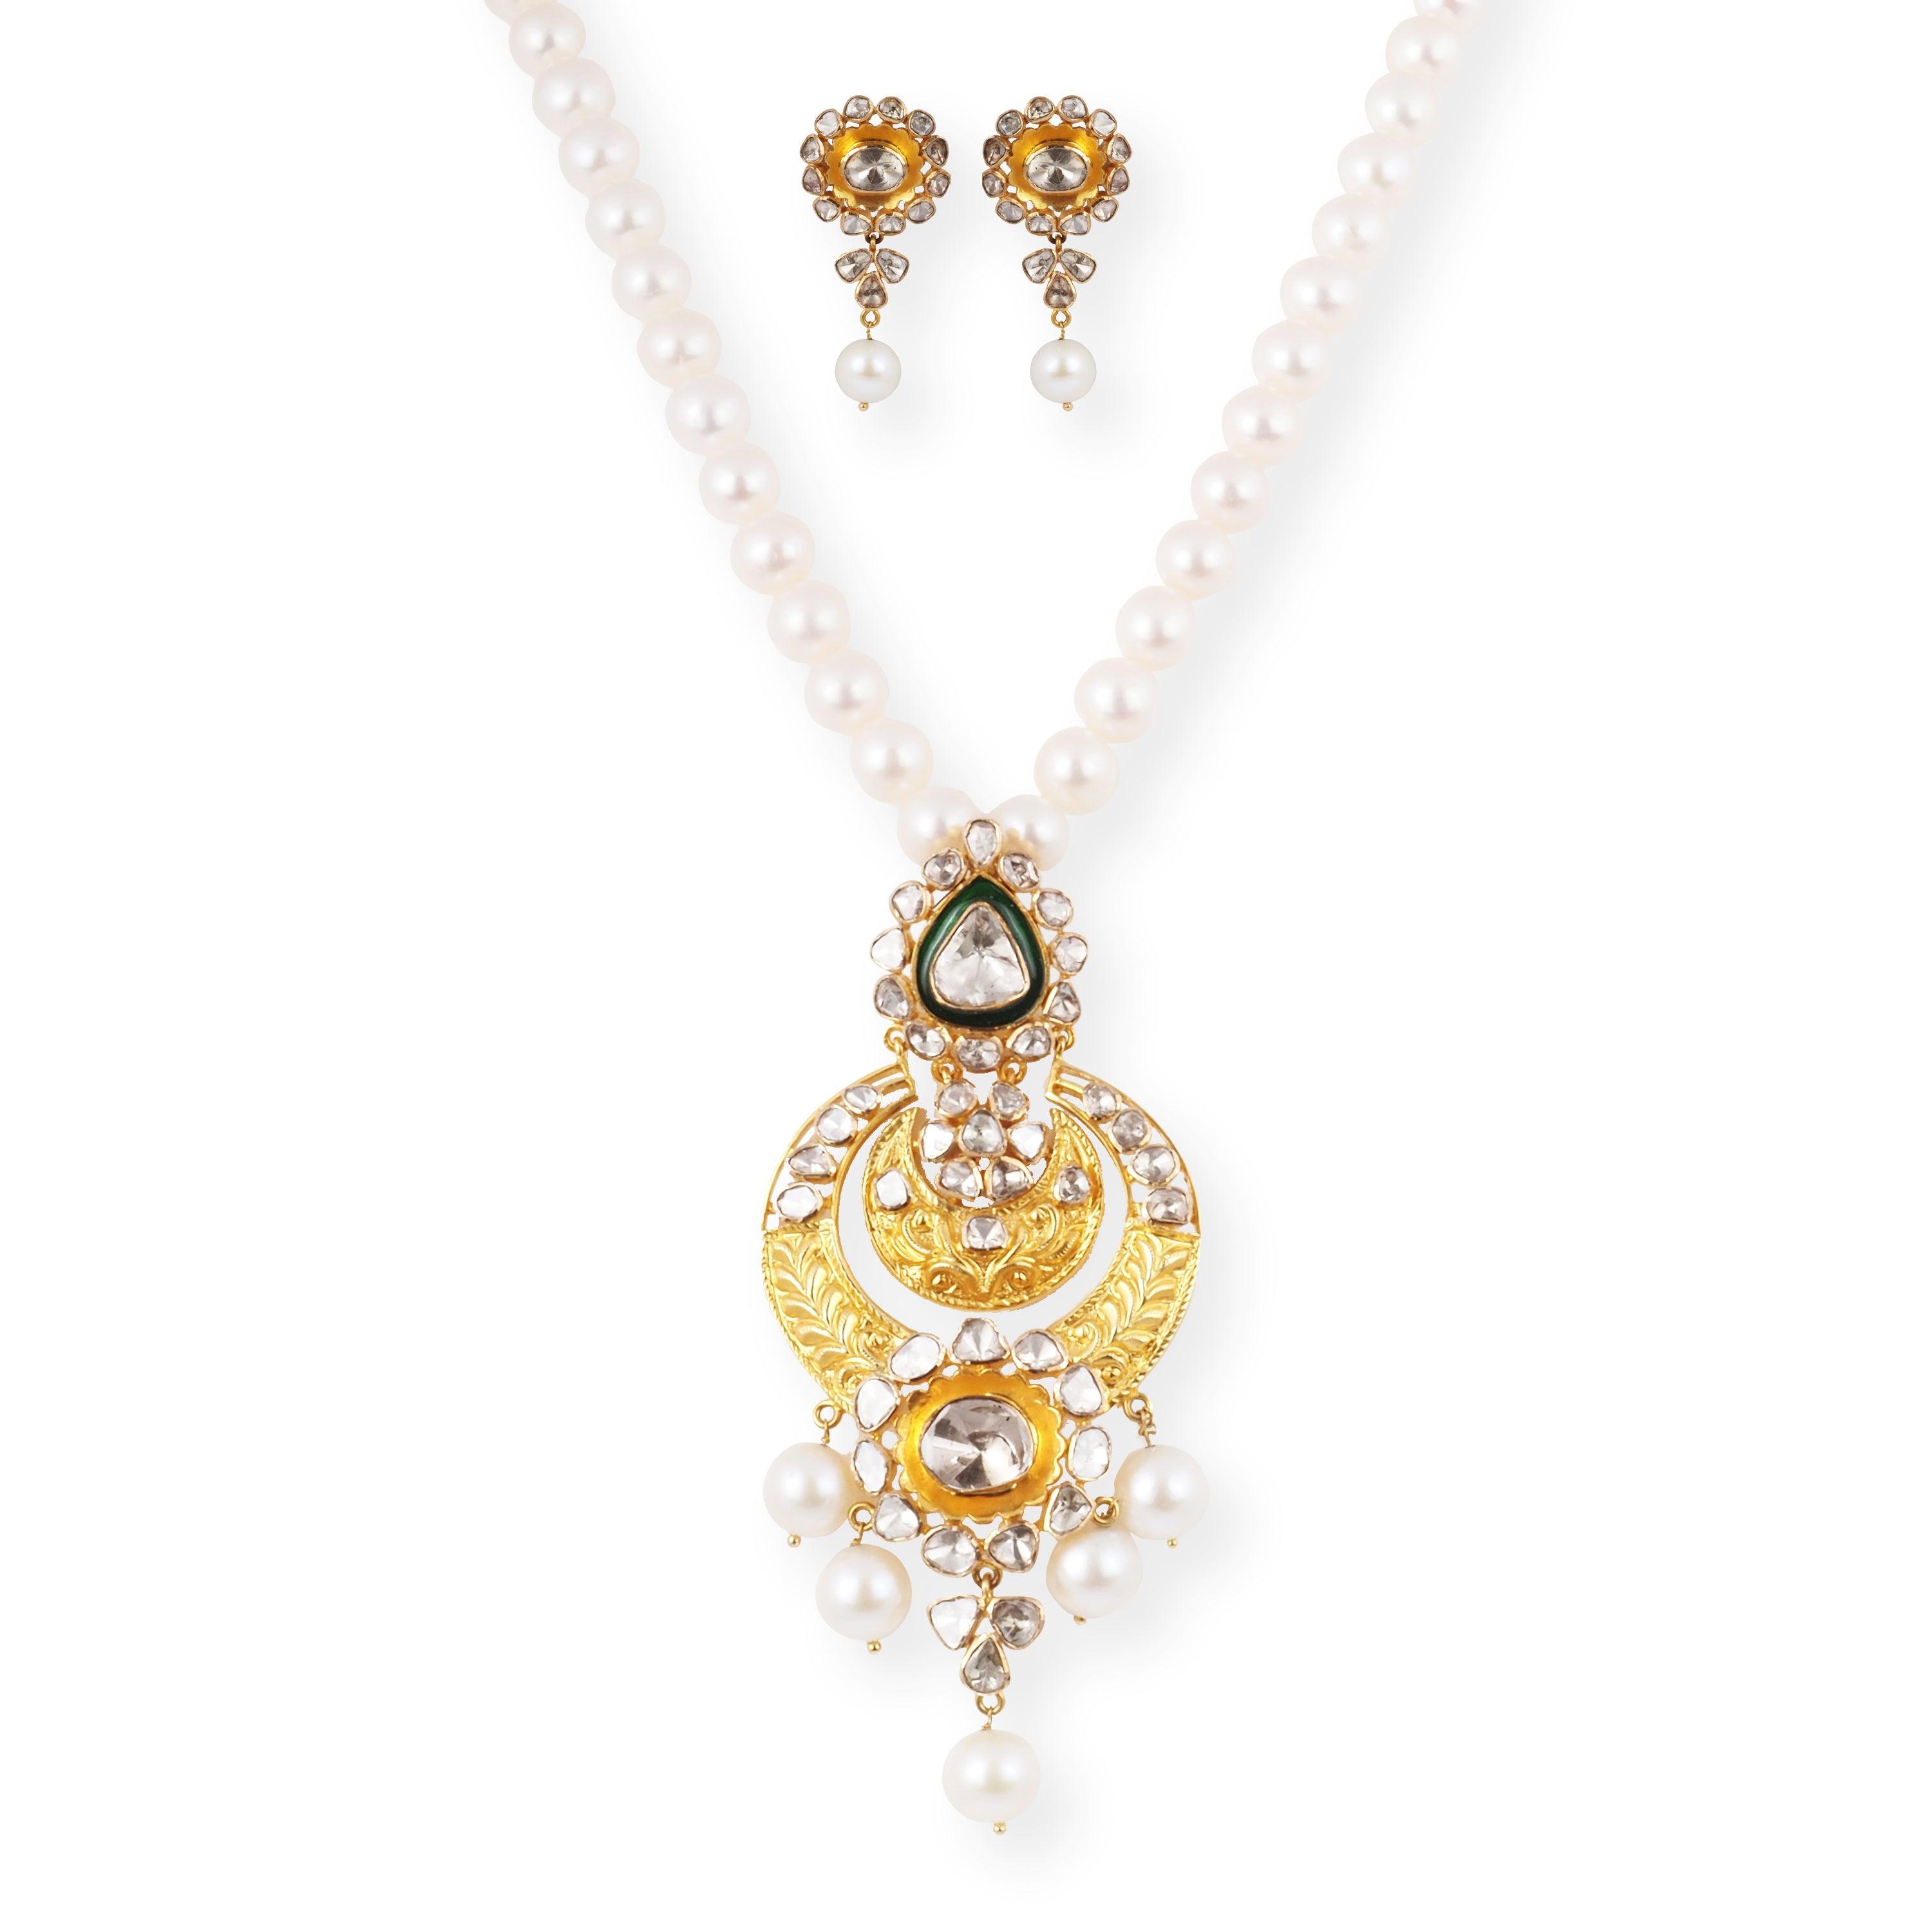 18ct Yellow Gold Polki Diamond and Cultured Pearl Necklace and Earrings Suite VPE0919909 - Minar Jewellers